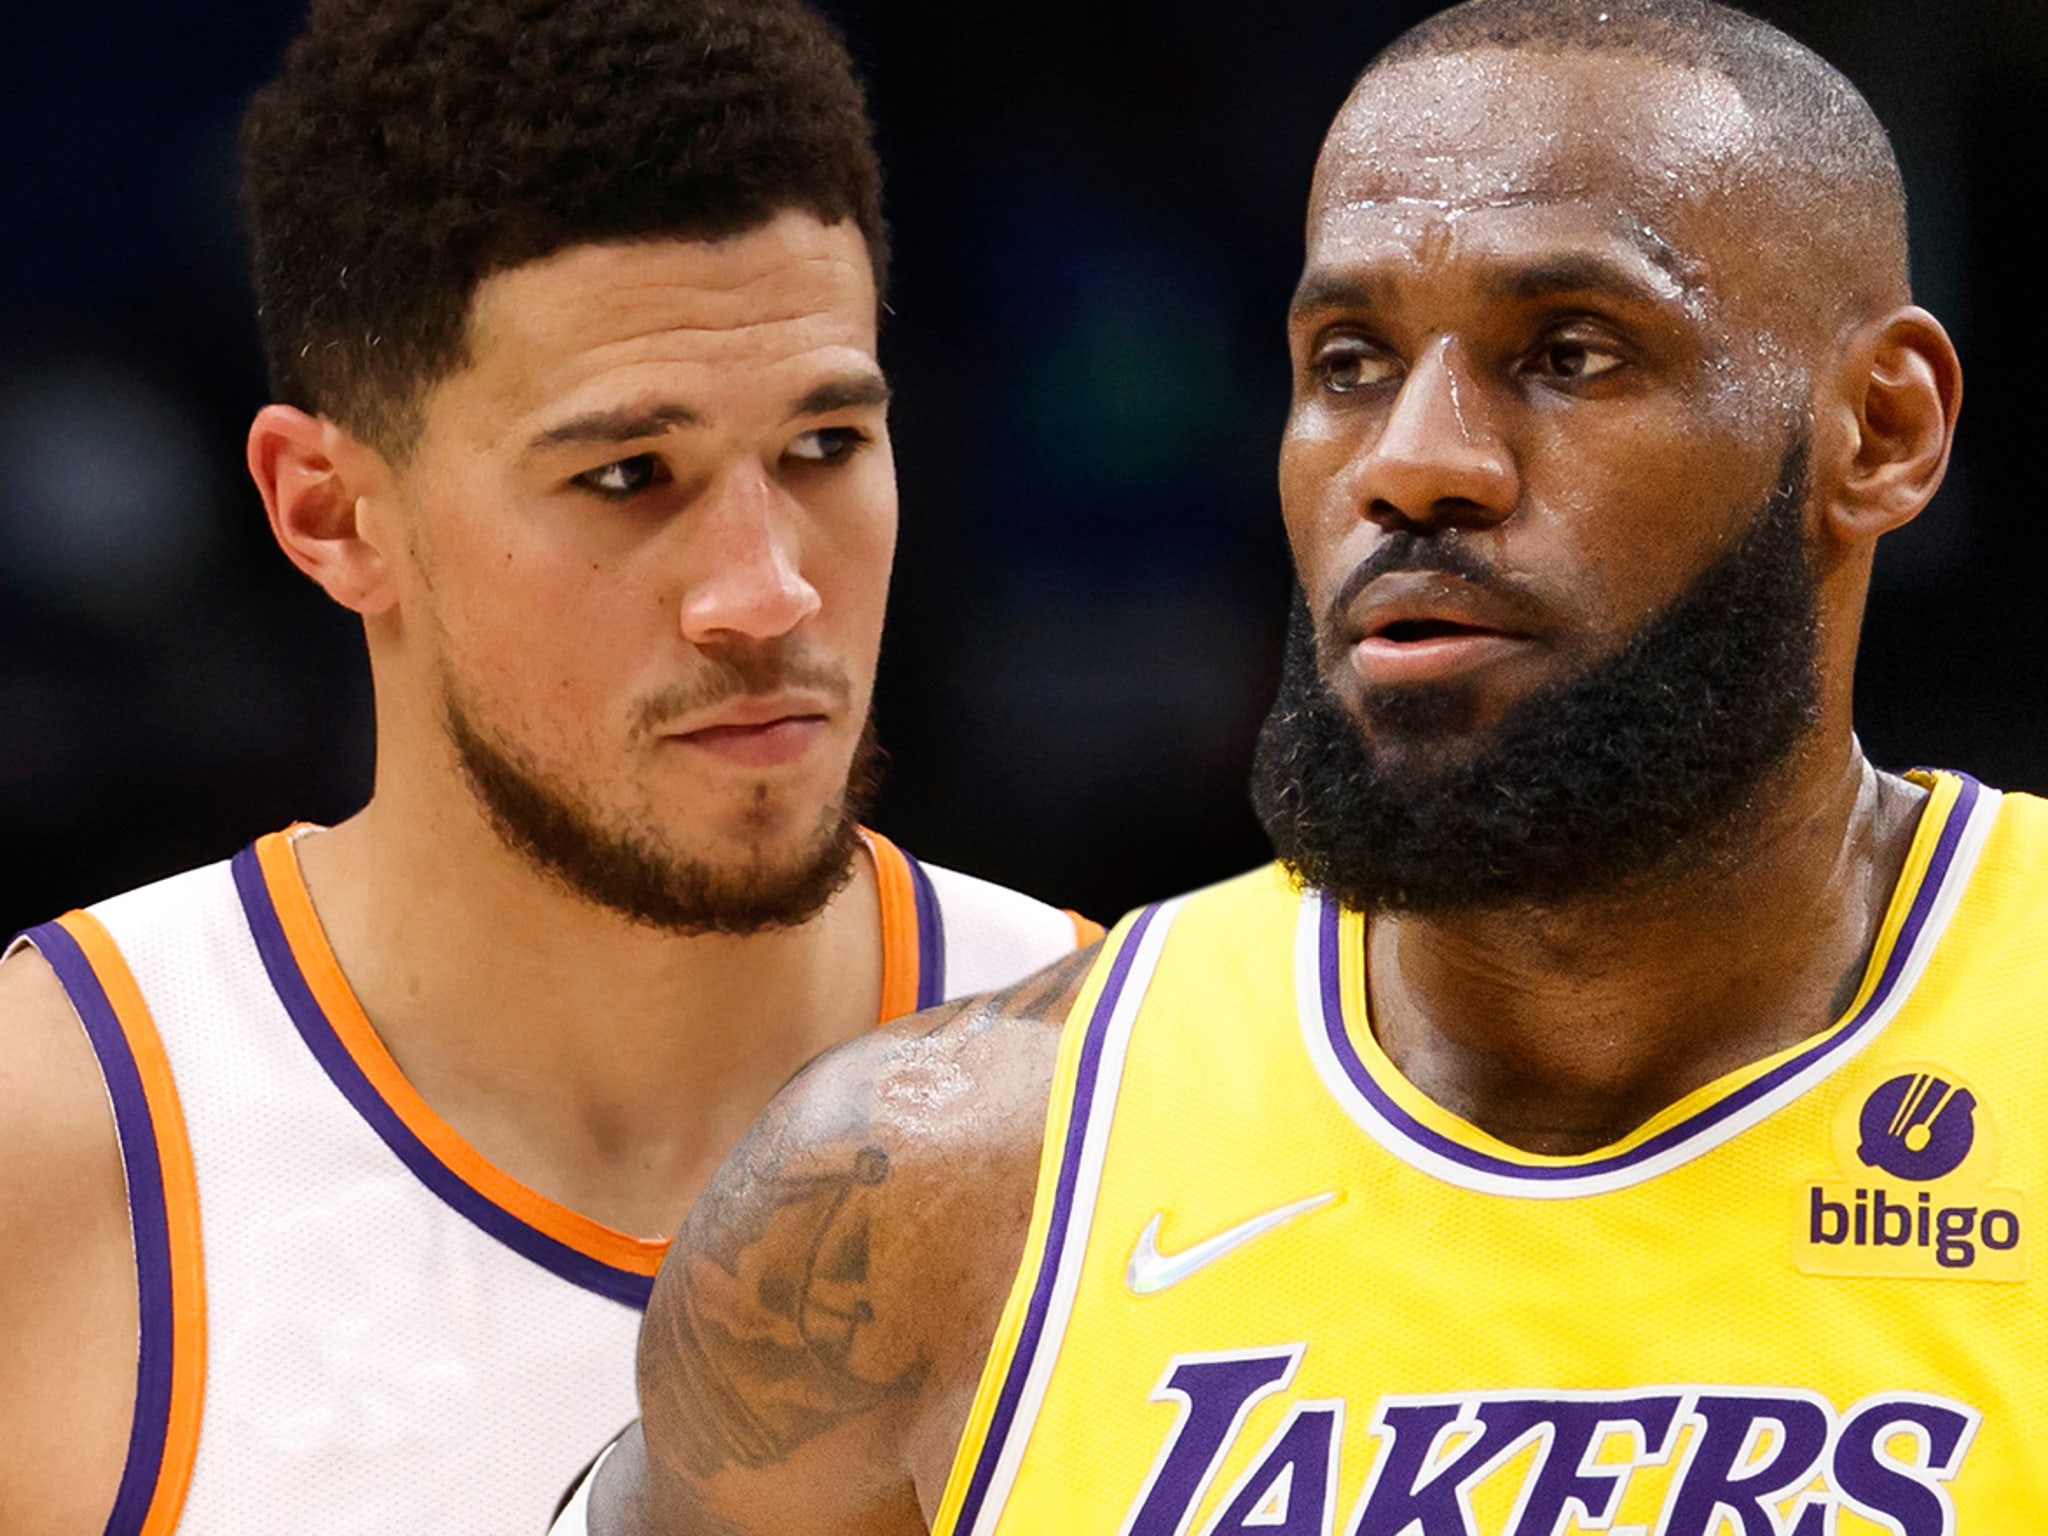 Devin Booker owns the world's last game-worn No. 23 LeBron James jersey 